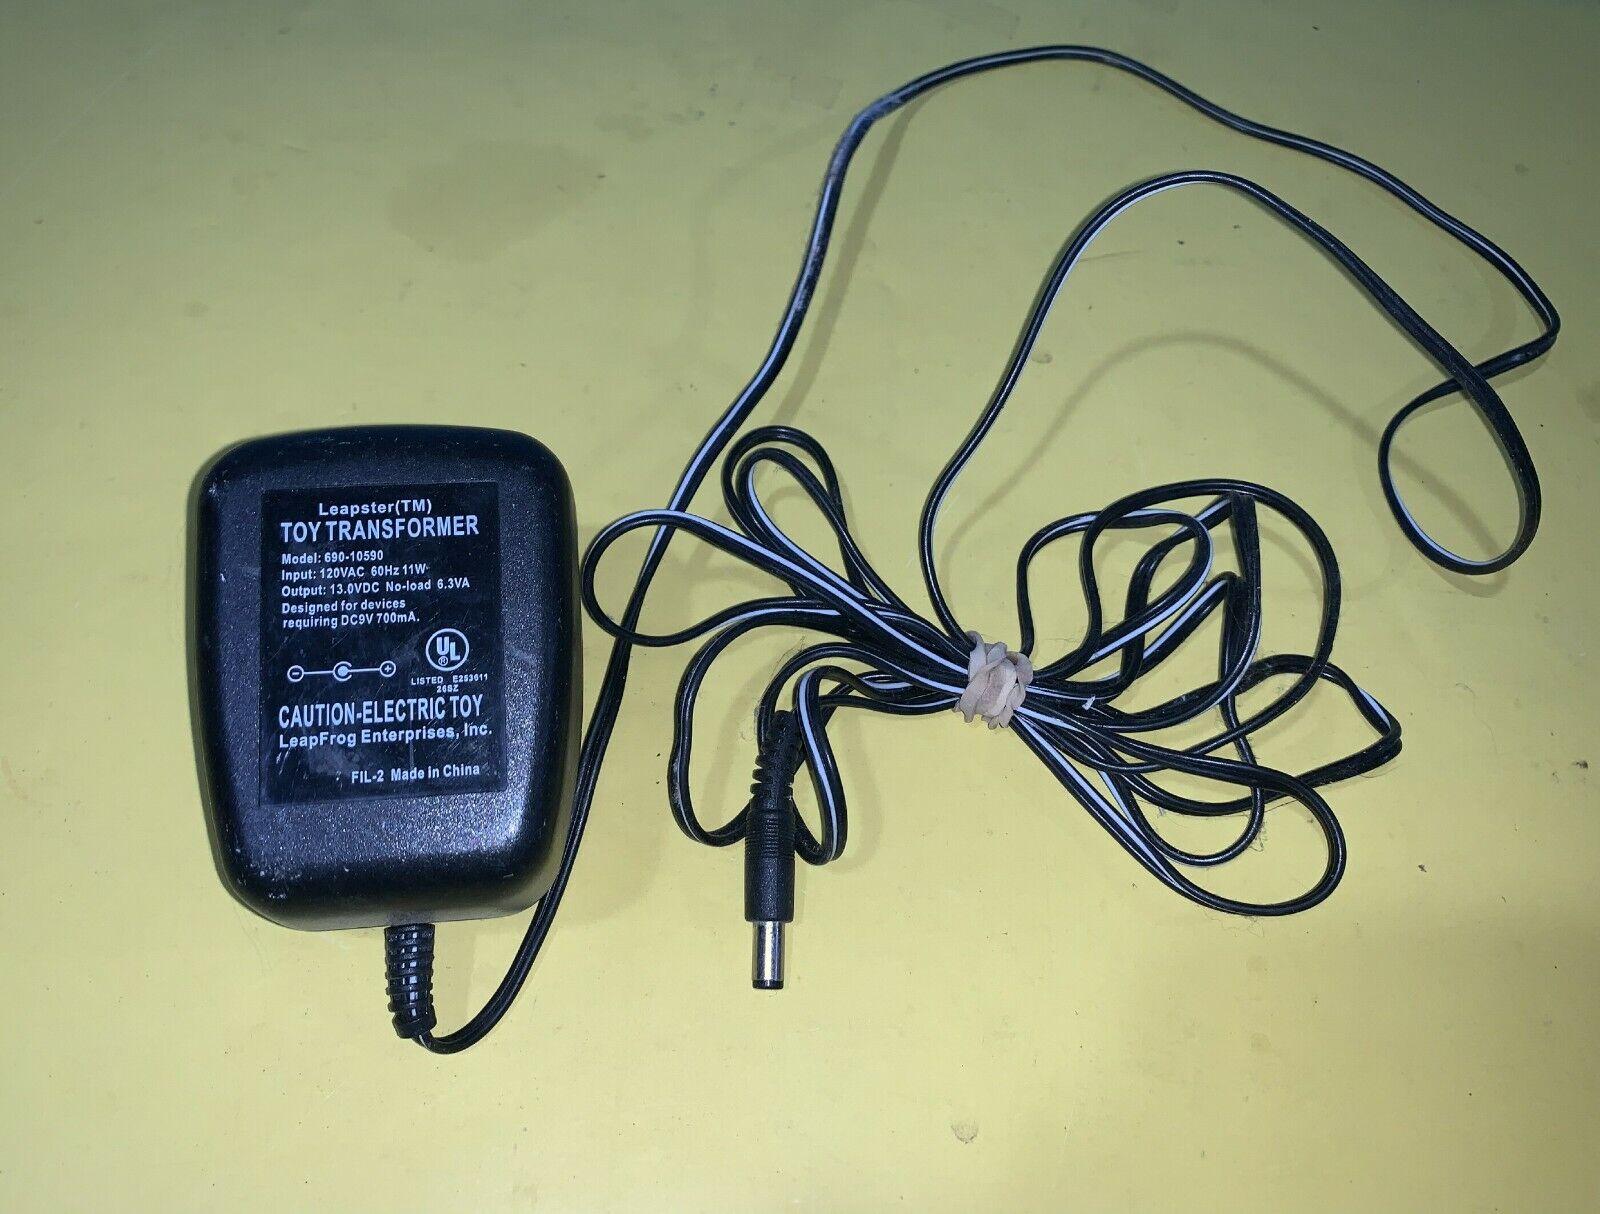 Leapster Leapfrog 690-10590 Toy Transformer In a popularity 1 AC Charger Adapter Miami Mall